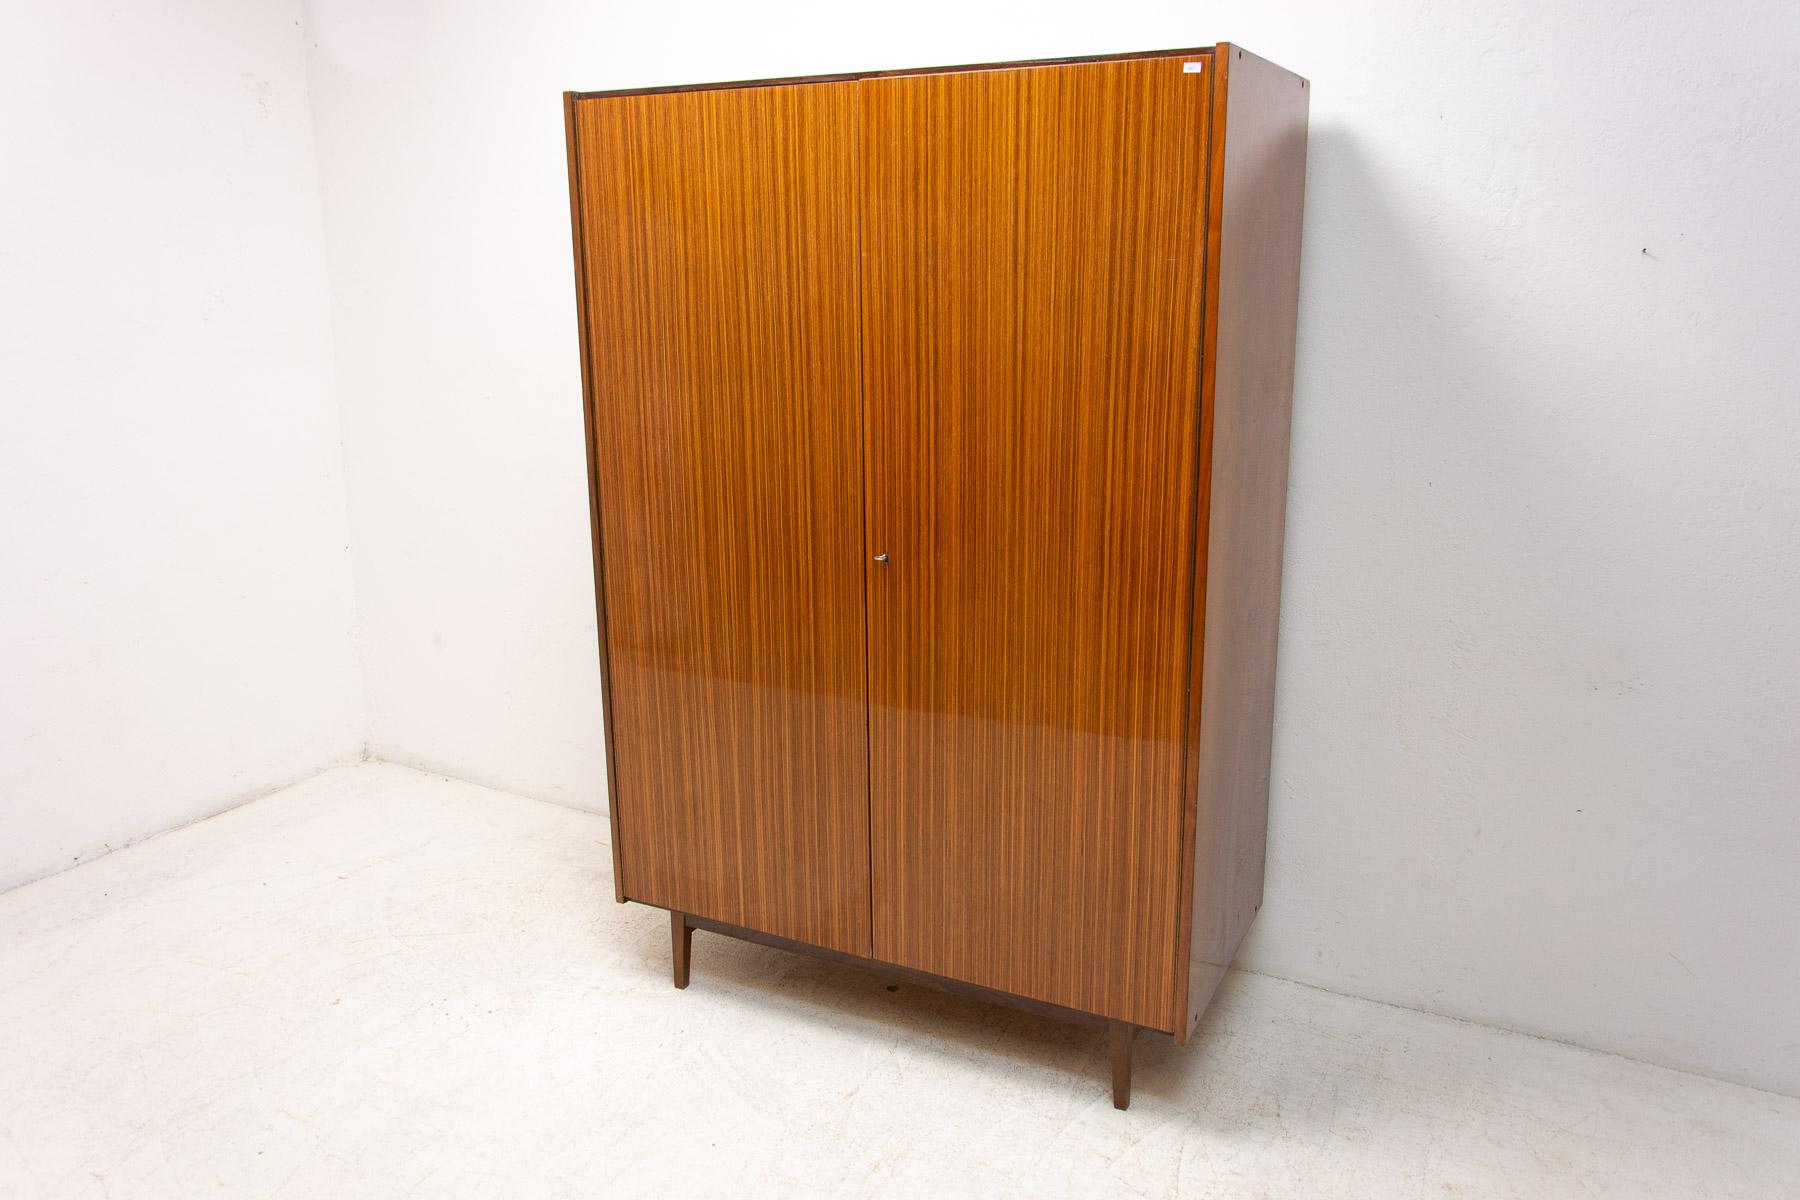 Vintage Czechoslovak wardrobe, made in the 1970´s in the former Czechoslovakia. Made by Interiér Praha company.

It´s made of plywood, glossy mahogany veneer, beech wood legs.

The left side with shelves and two drawers, on the right there is